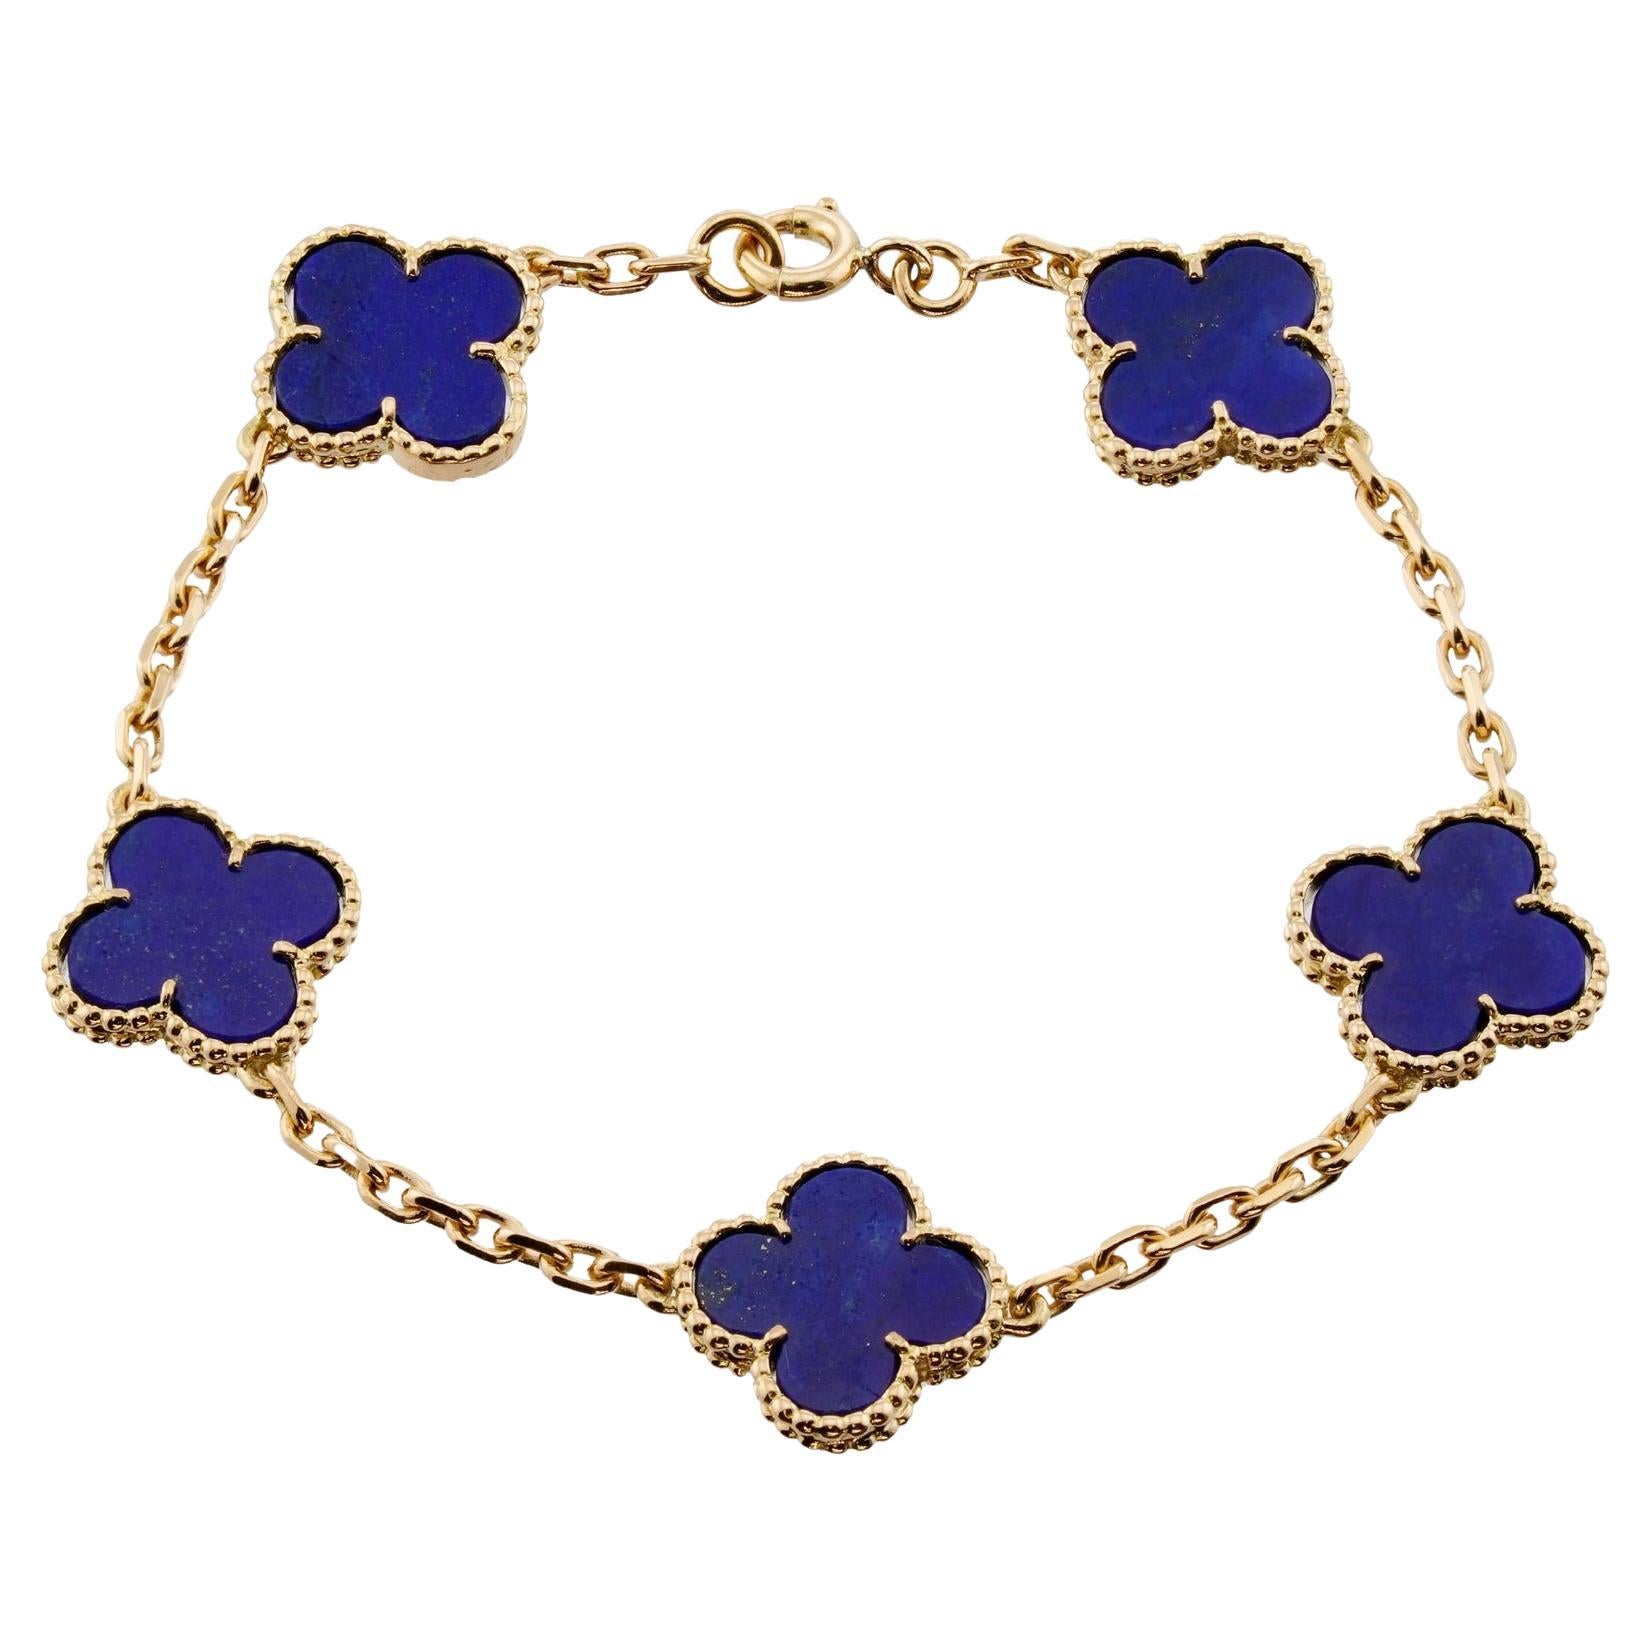 Can you wear Van Cleef and Arpels jewelry every day?